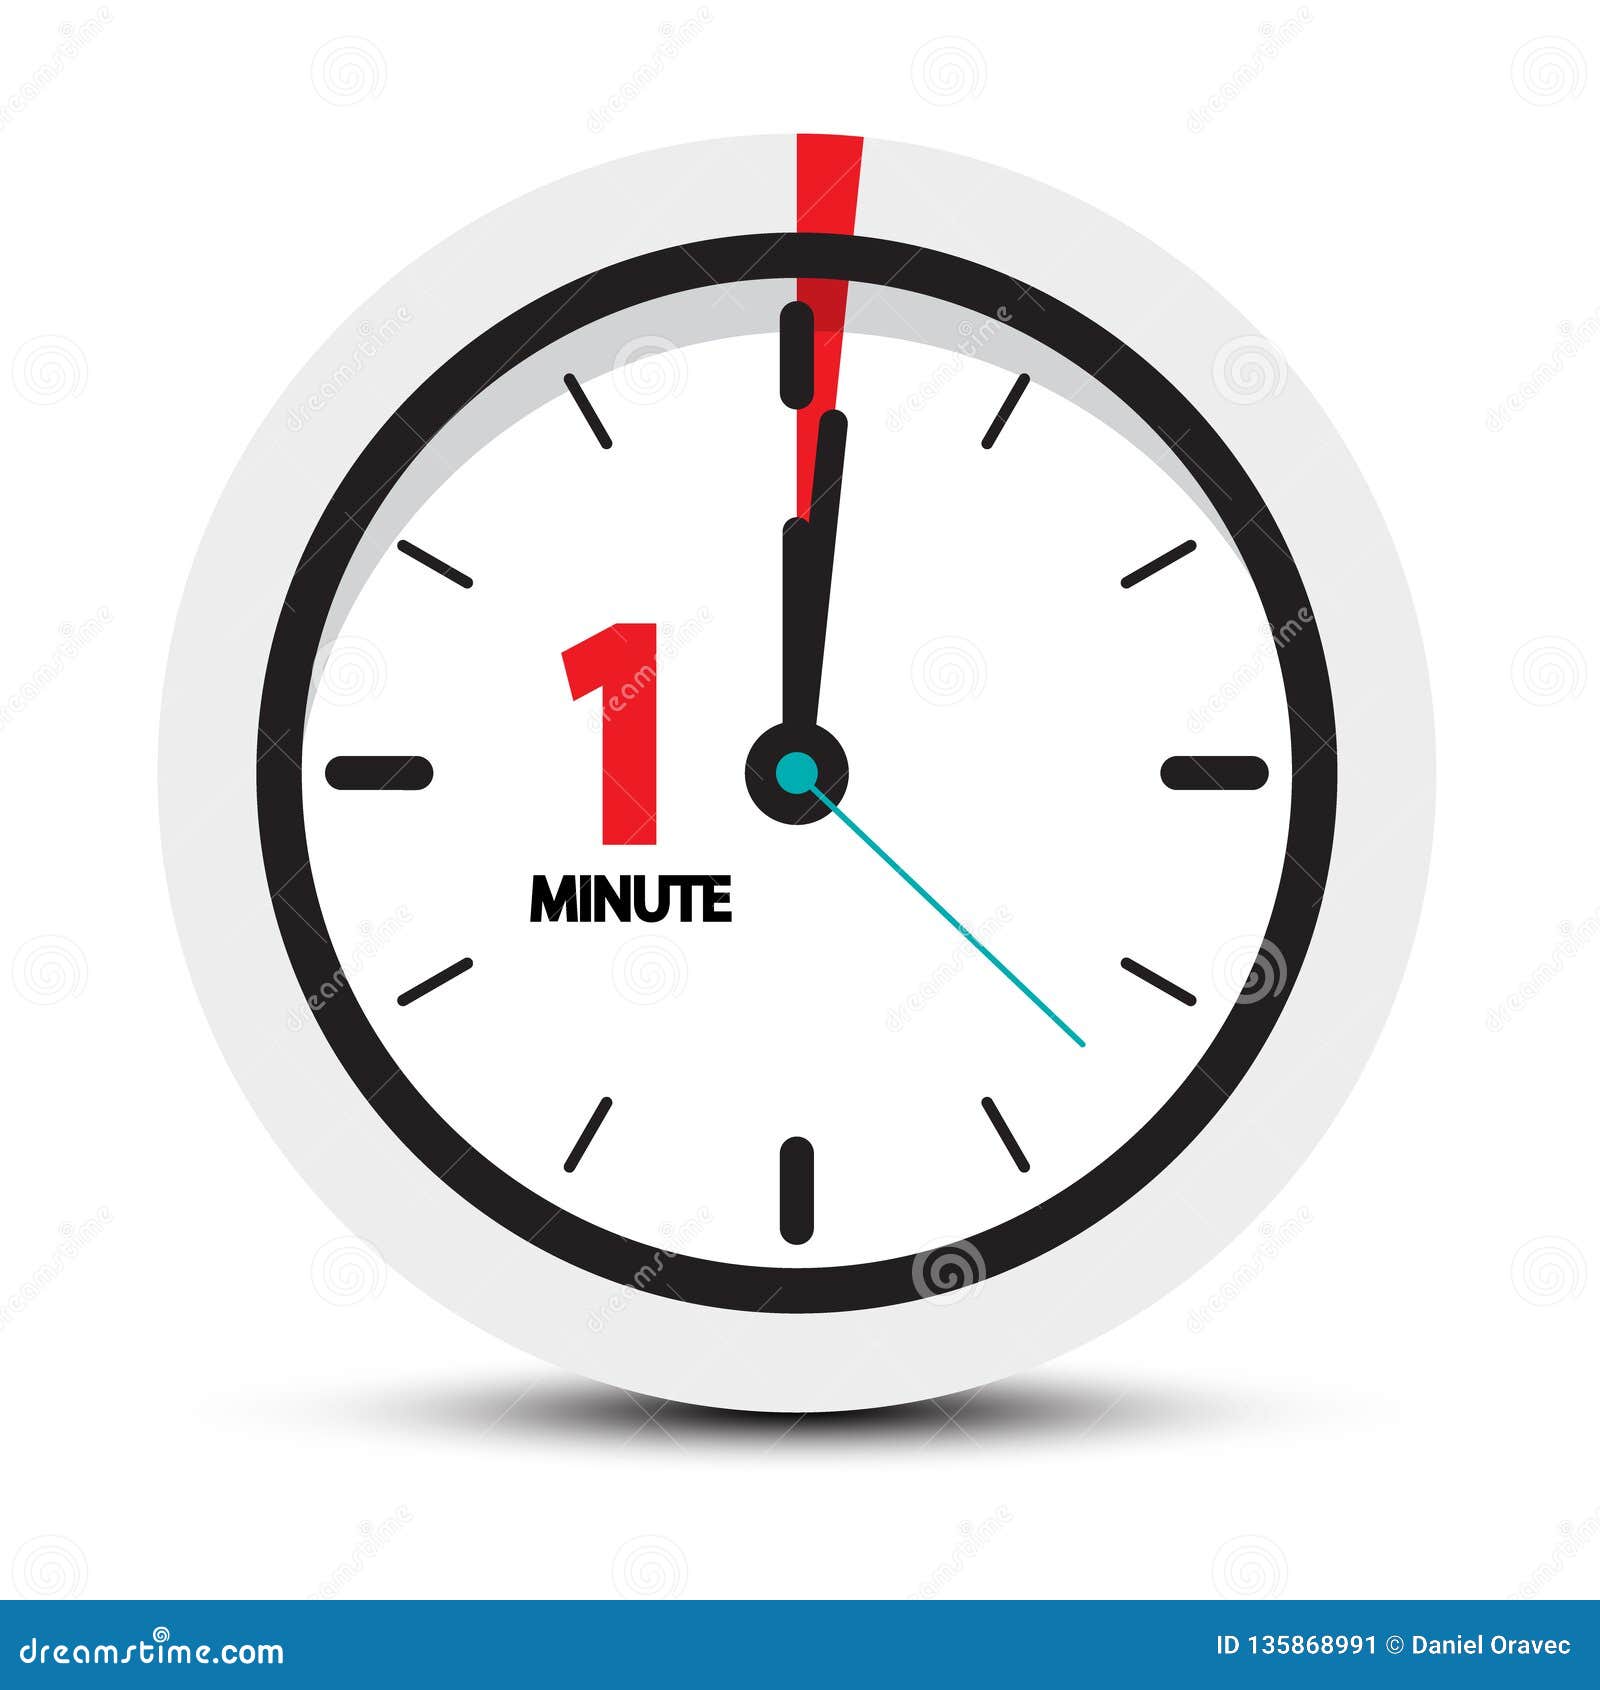 one minute clock icon